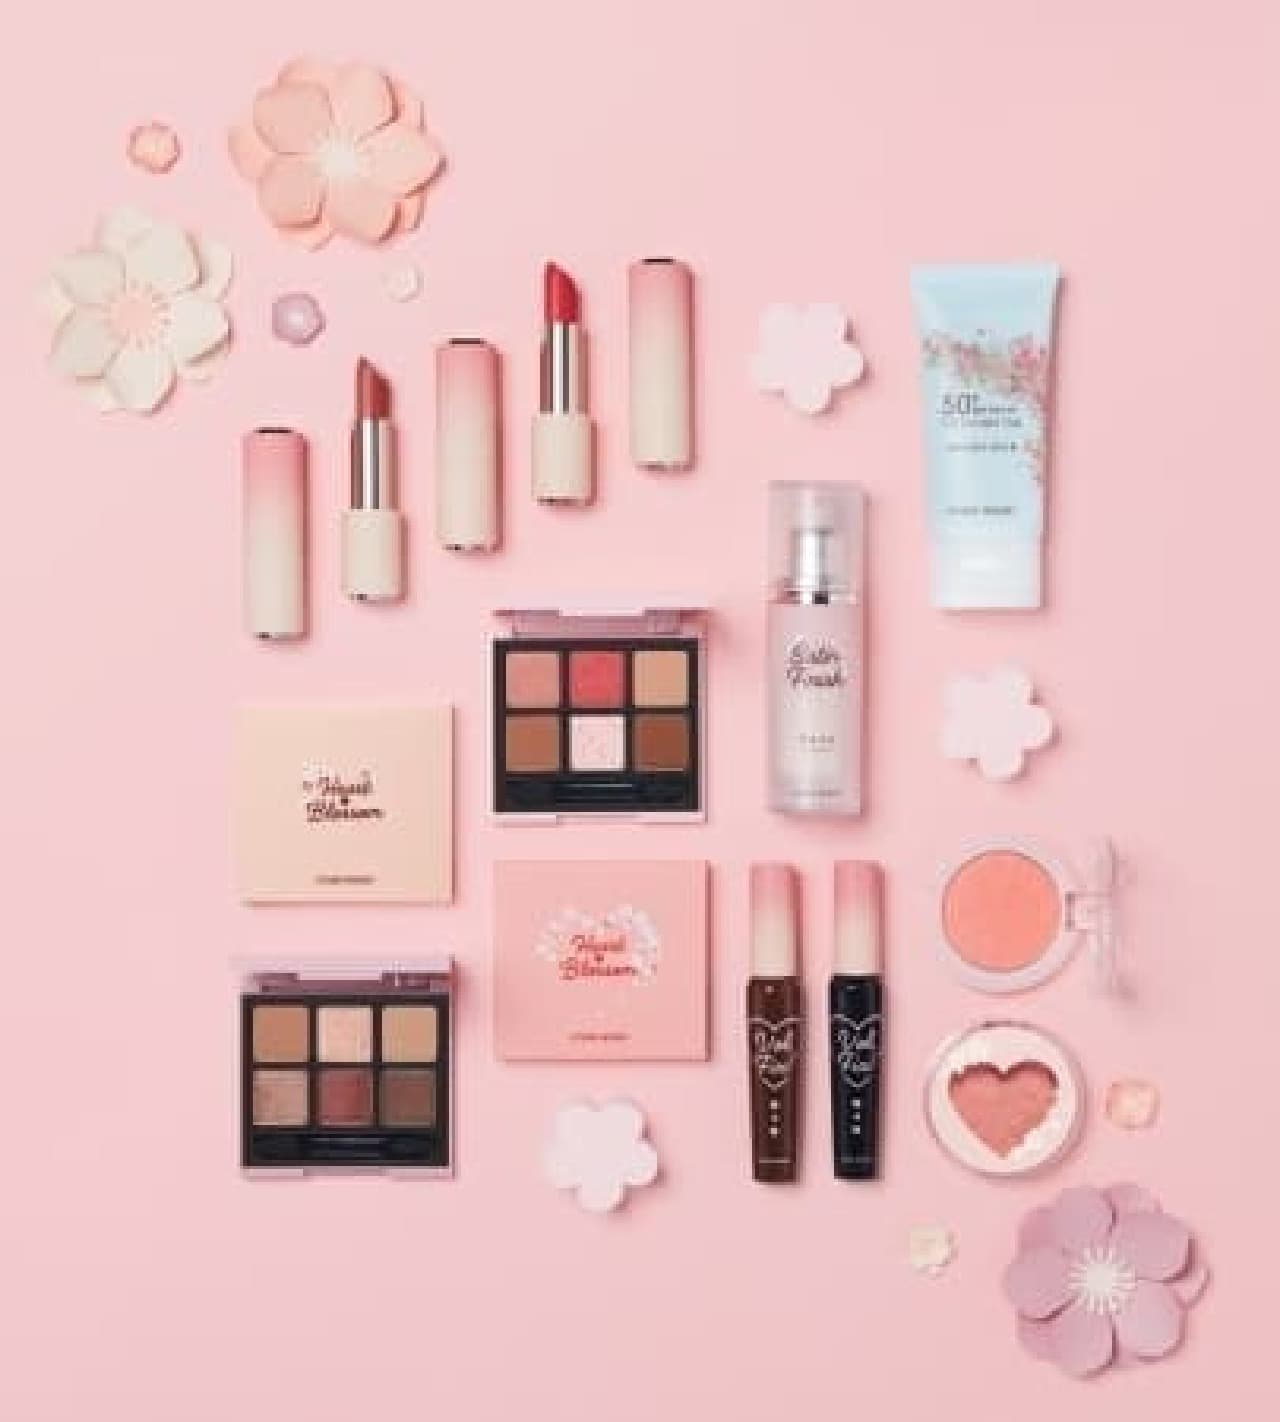 Etude House "Heart Blossom Collection"